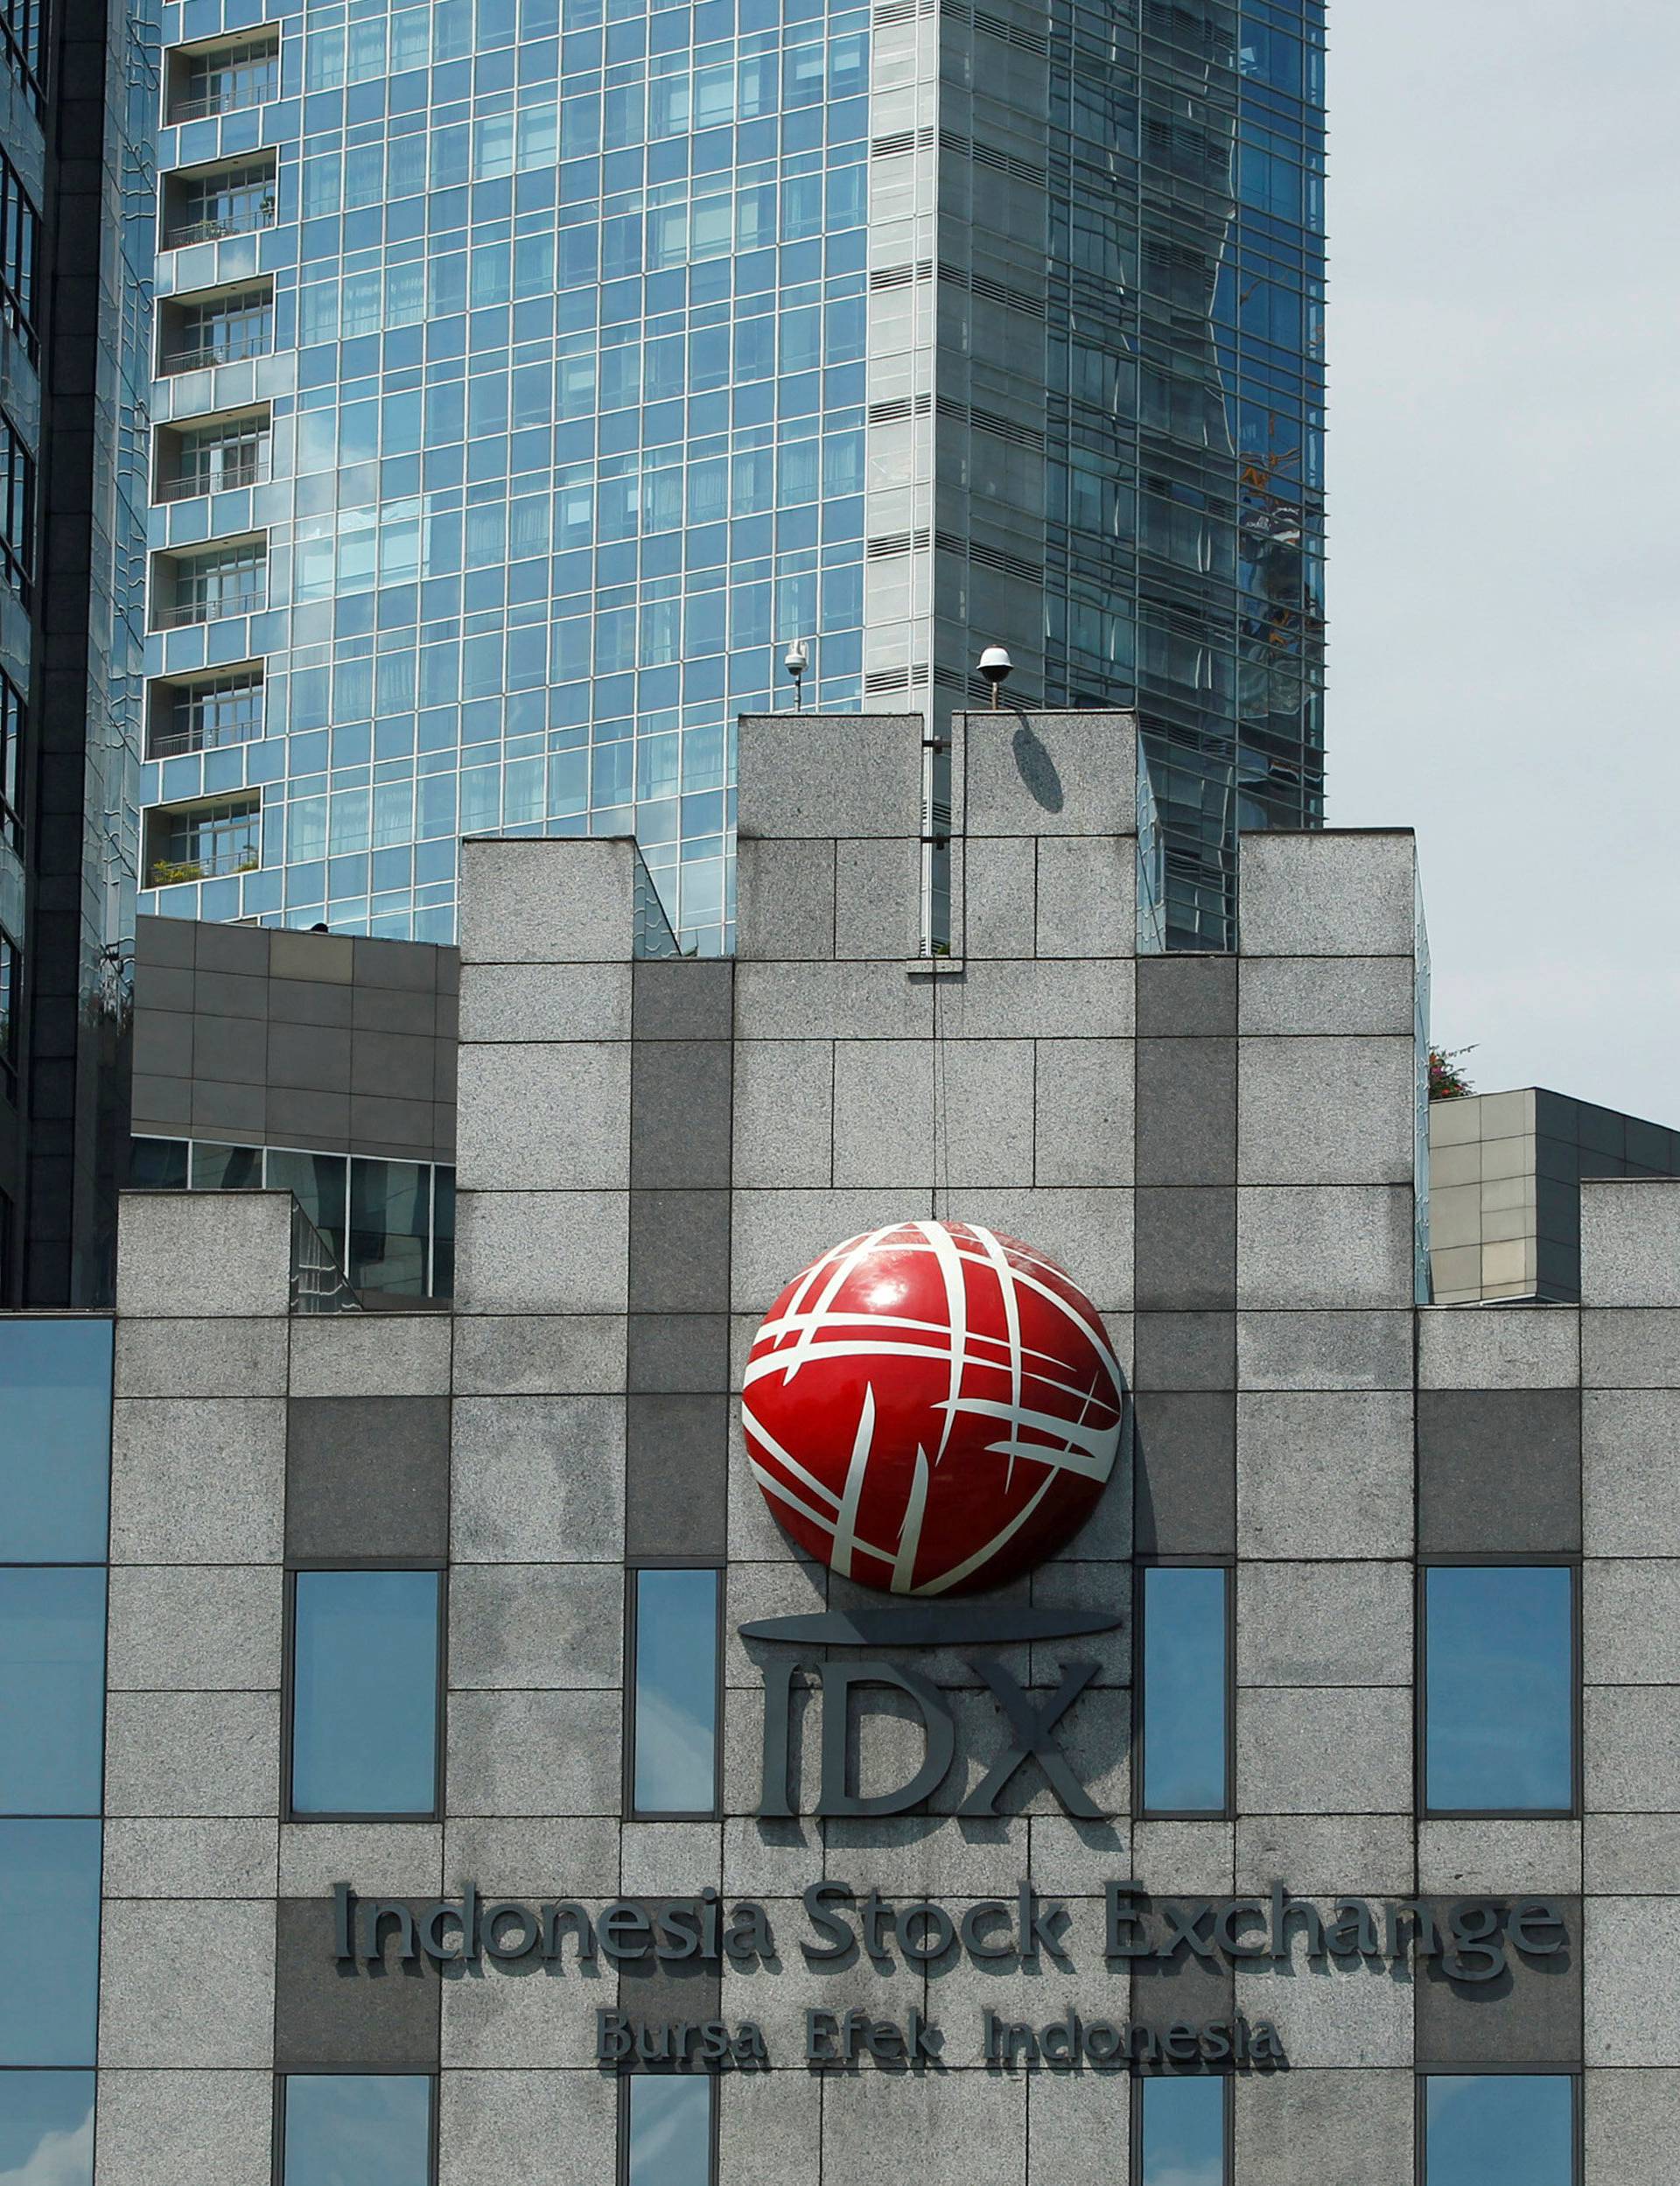 FILE PHOTO: A view of the Indonesia Stock Exchange building in Jakarta, Indonesia